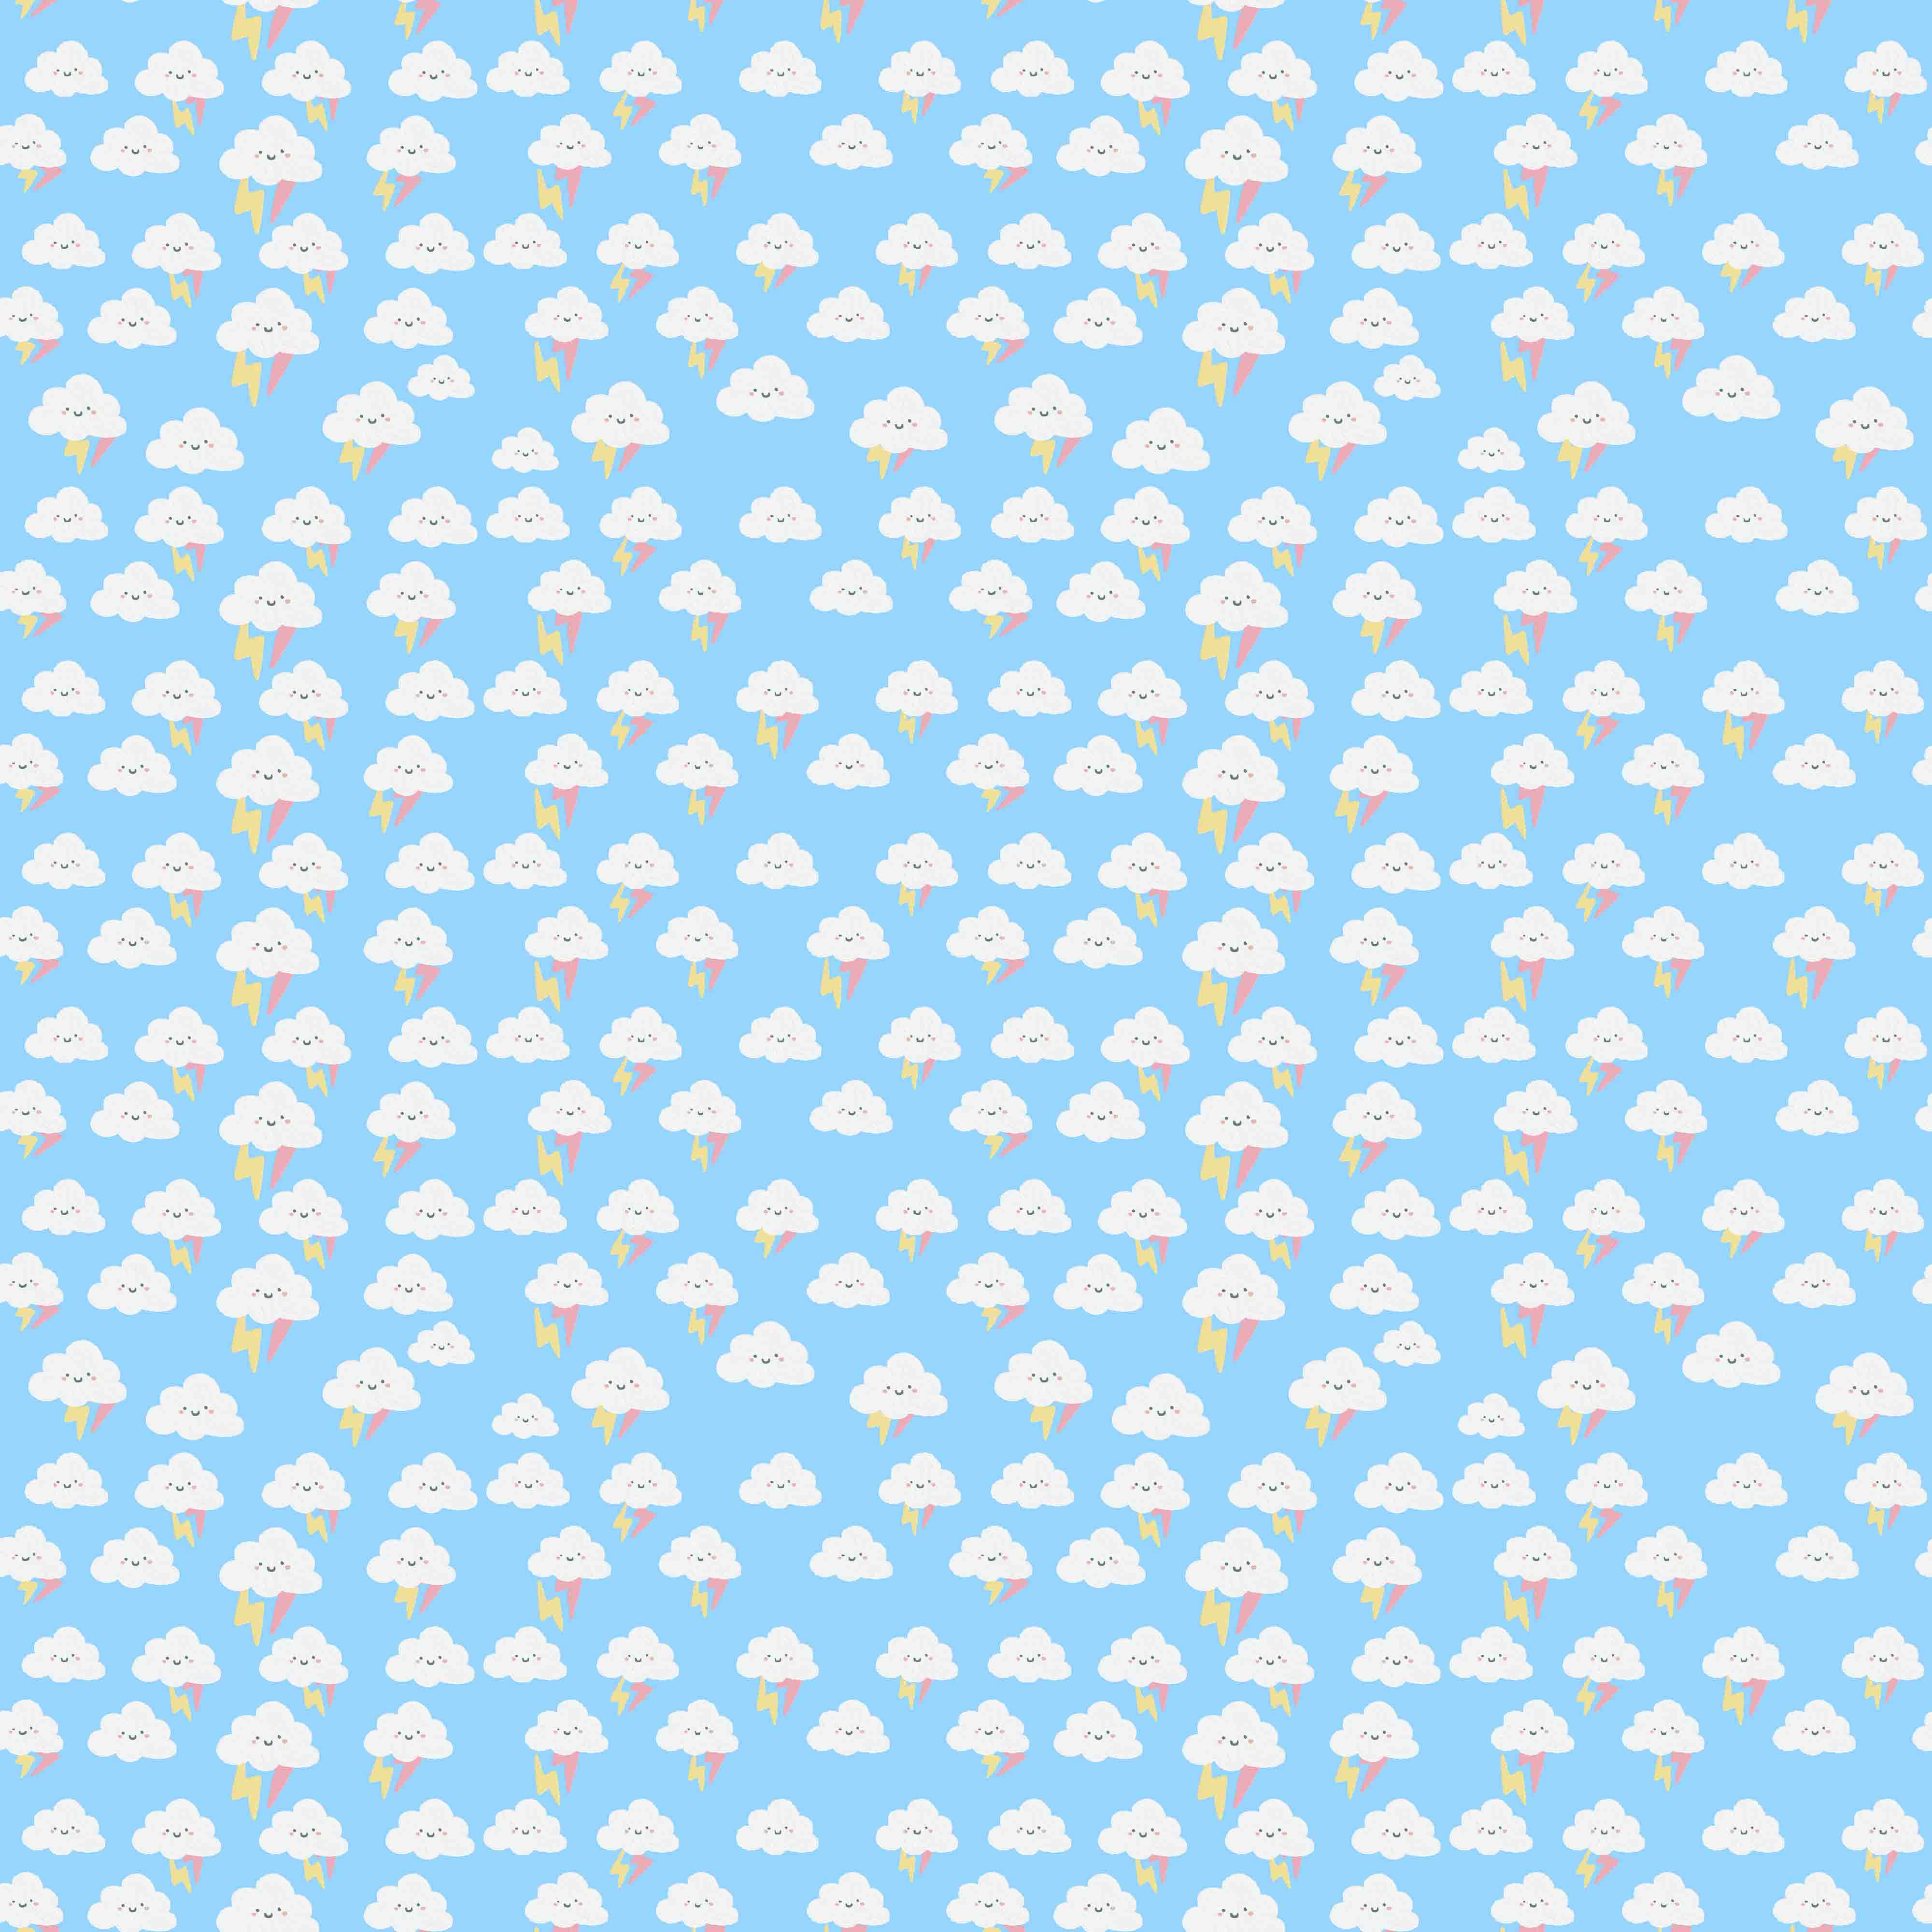 Blue background with white clouds and rainbows.